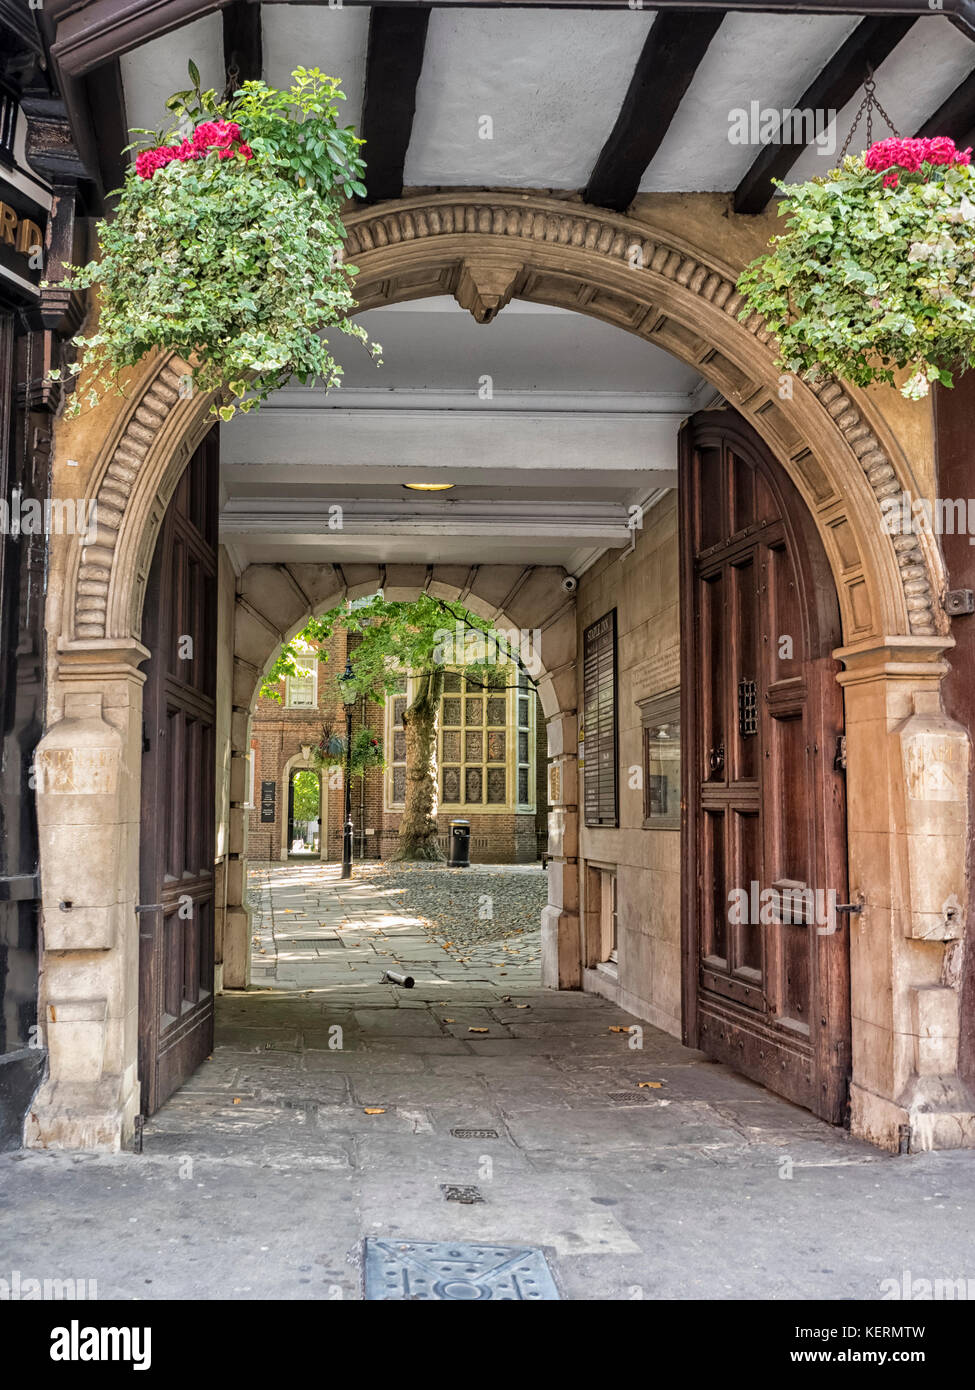 LONDON, UK - AUGUST 25, 2017:   Arched entrance in to the Courtyard of Staple Court from High Holborn Stock Photo